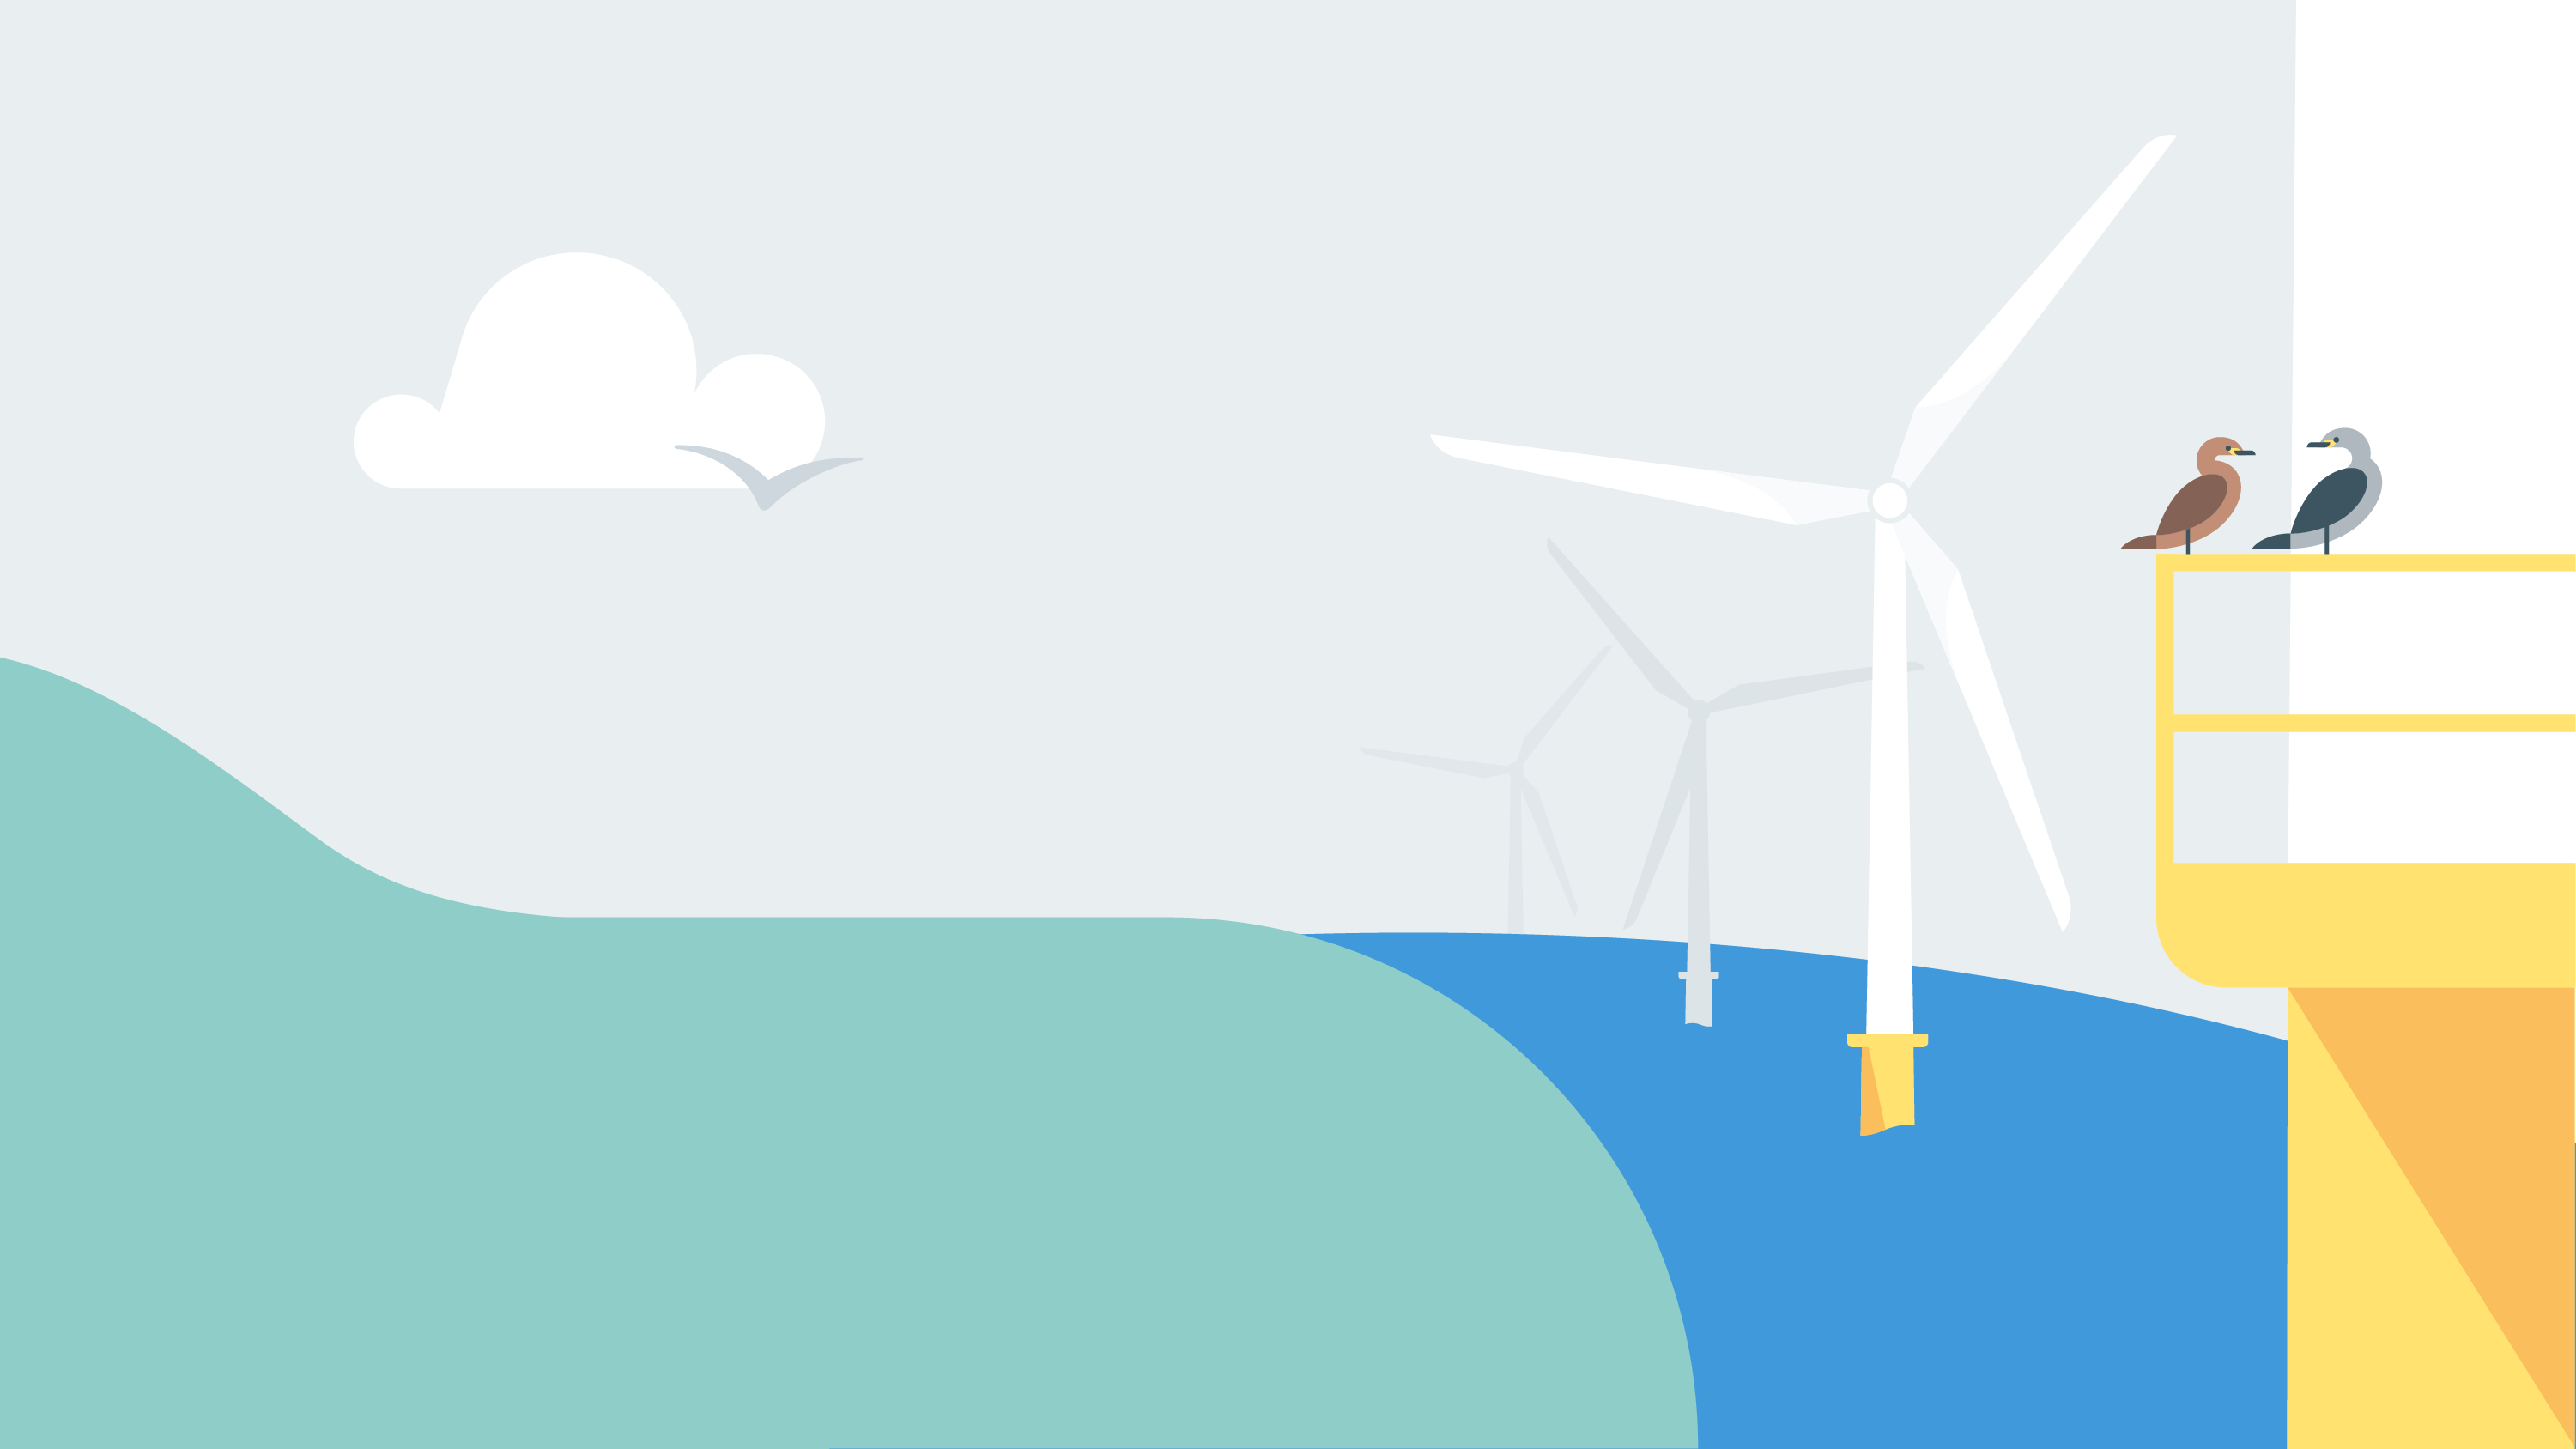 An animation of offshore wind turbines next to the shore offers the truth about offshore wind as a clean energy source.